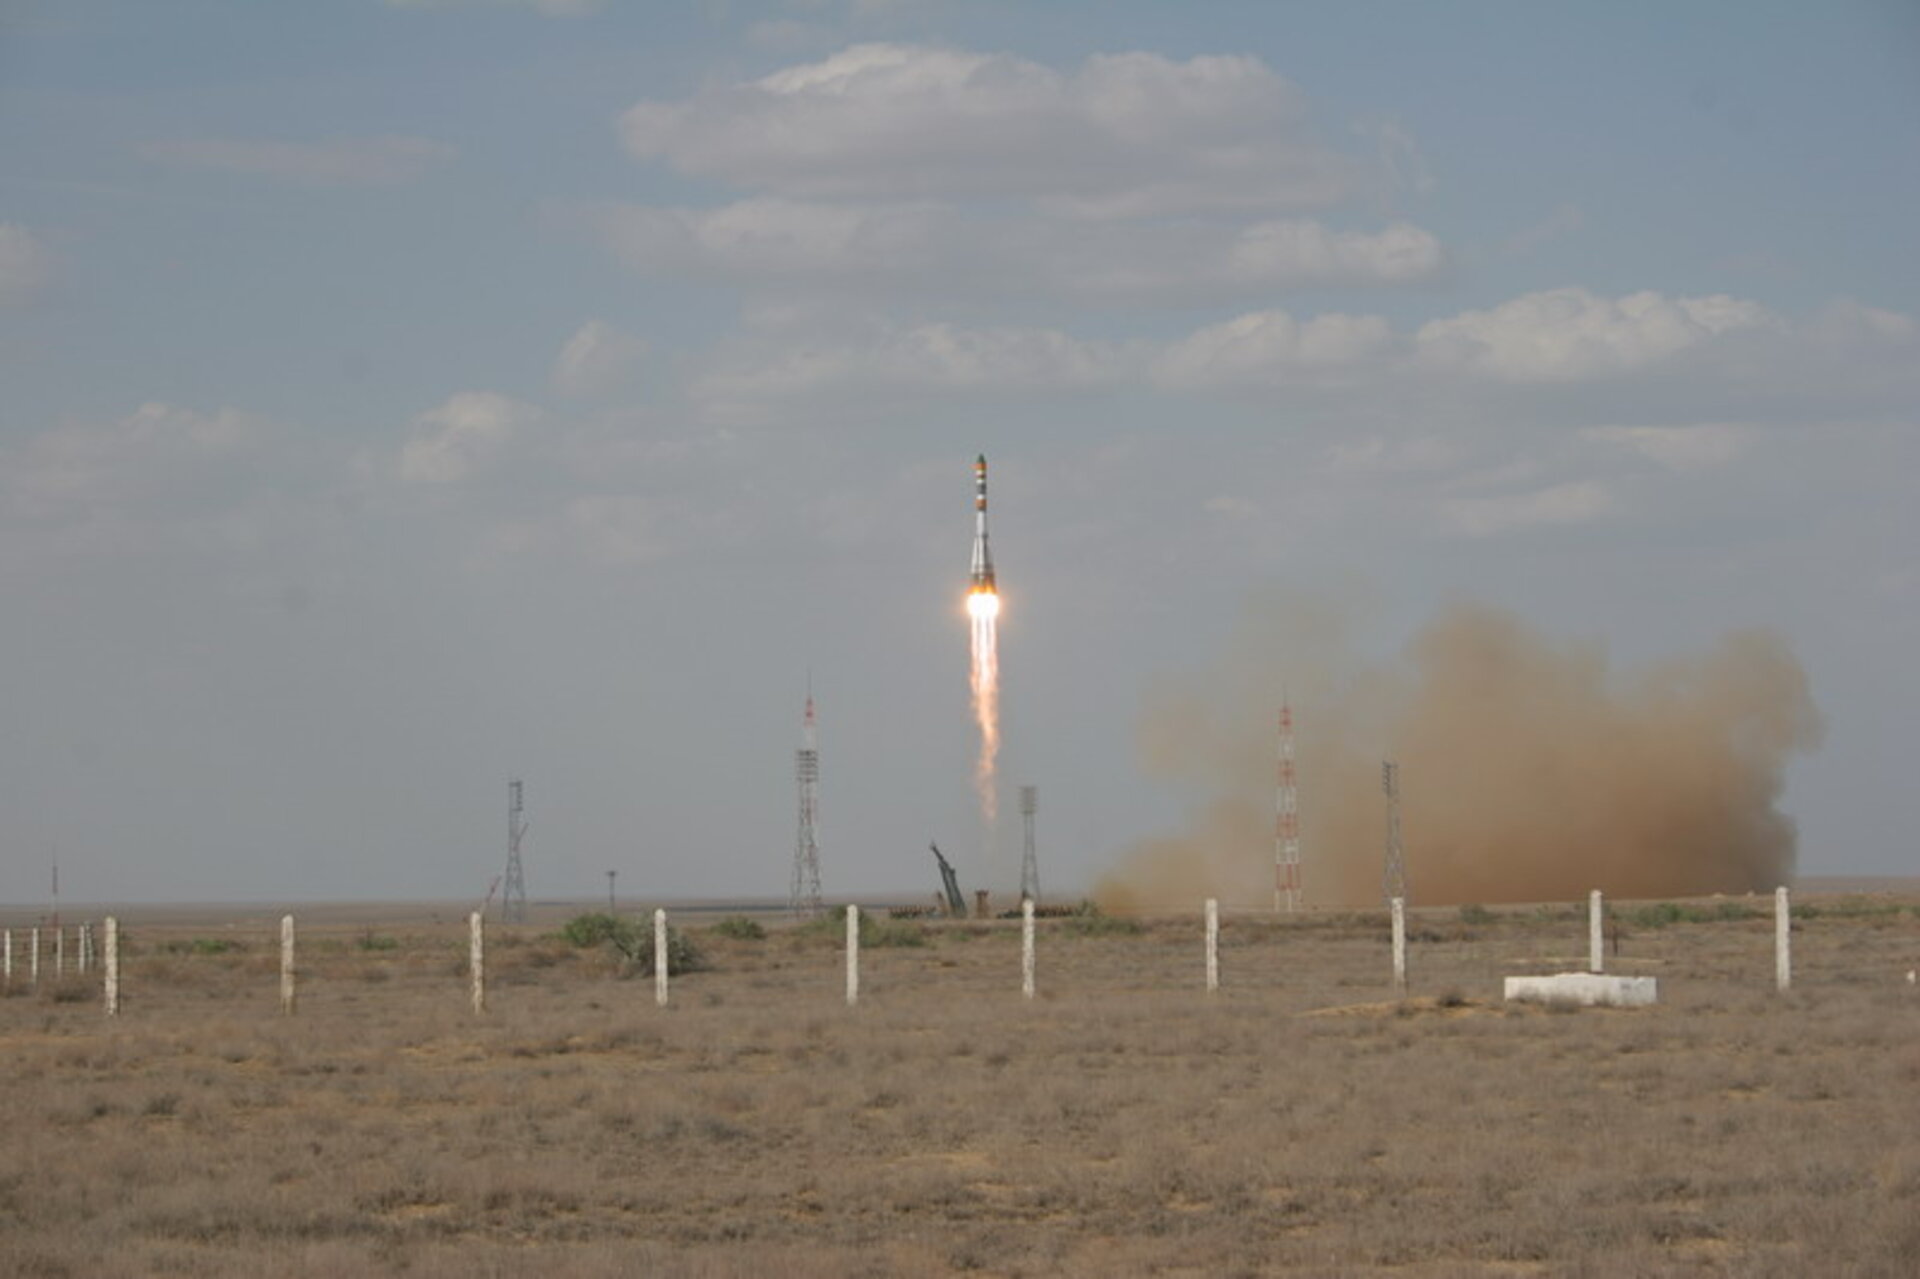 Successful launch of the Foton-M2 mission from Baikonur Cosmodrome